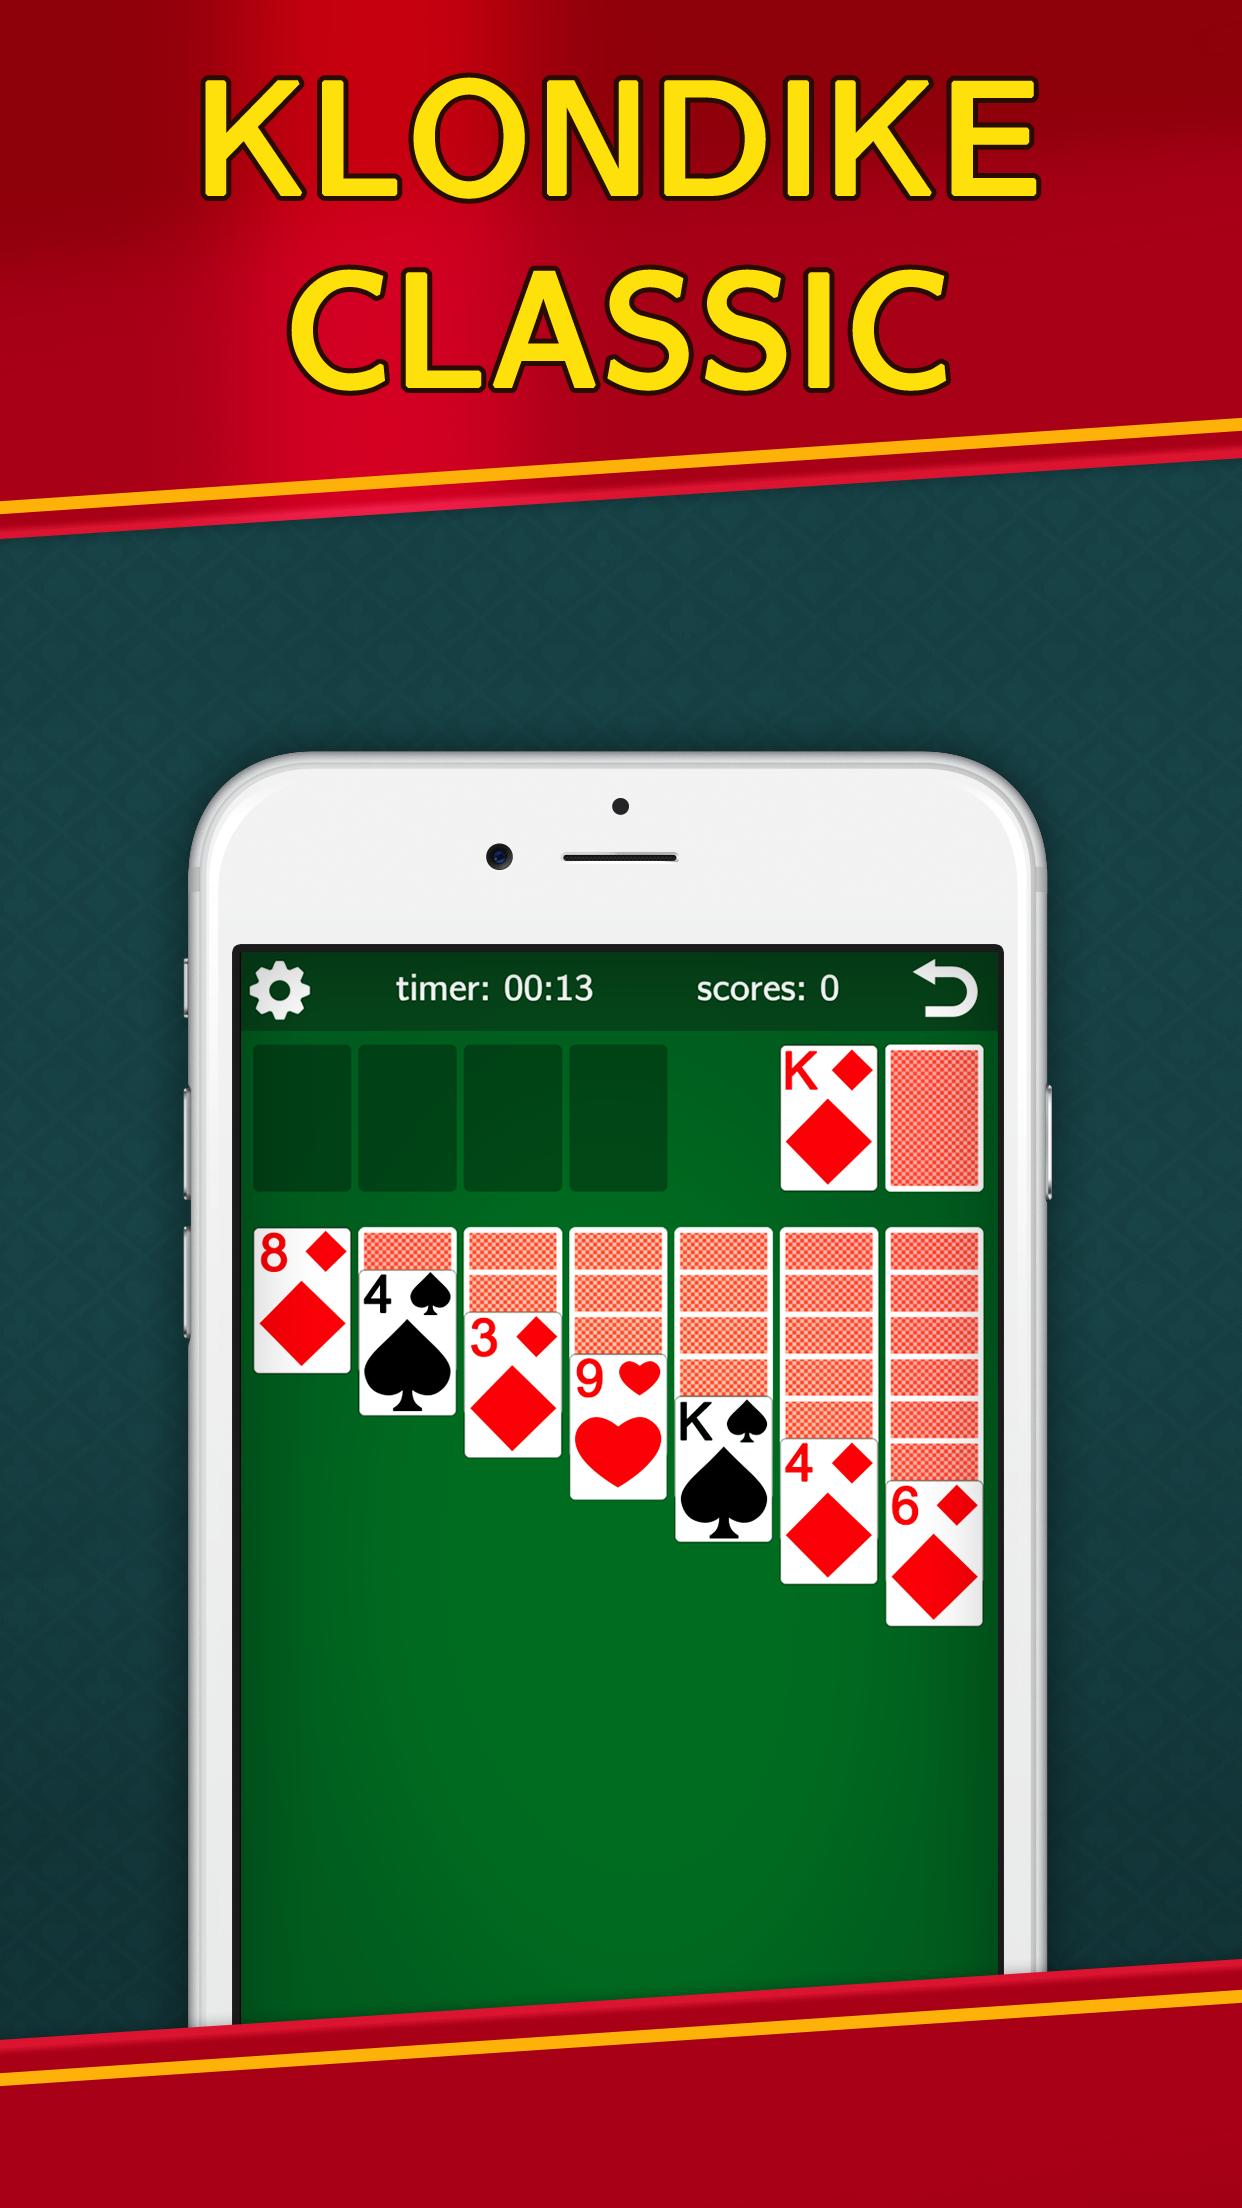 Classic Solitaire Klondike - No hay anuncios! for Android - APK Download